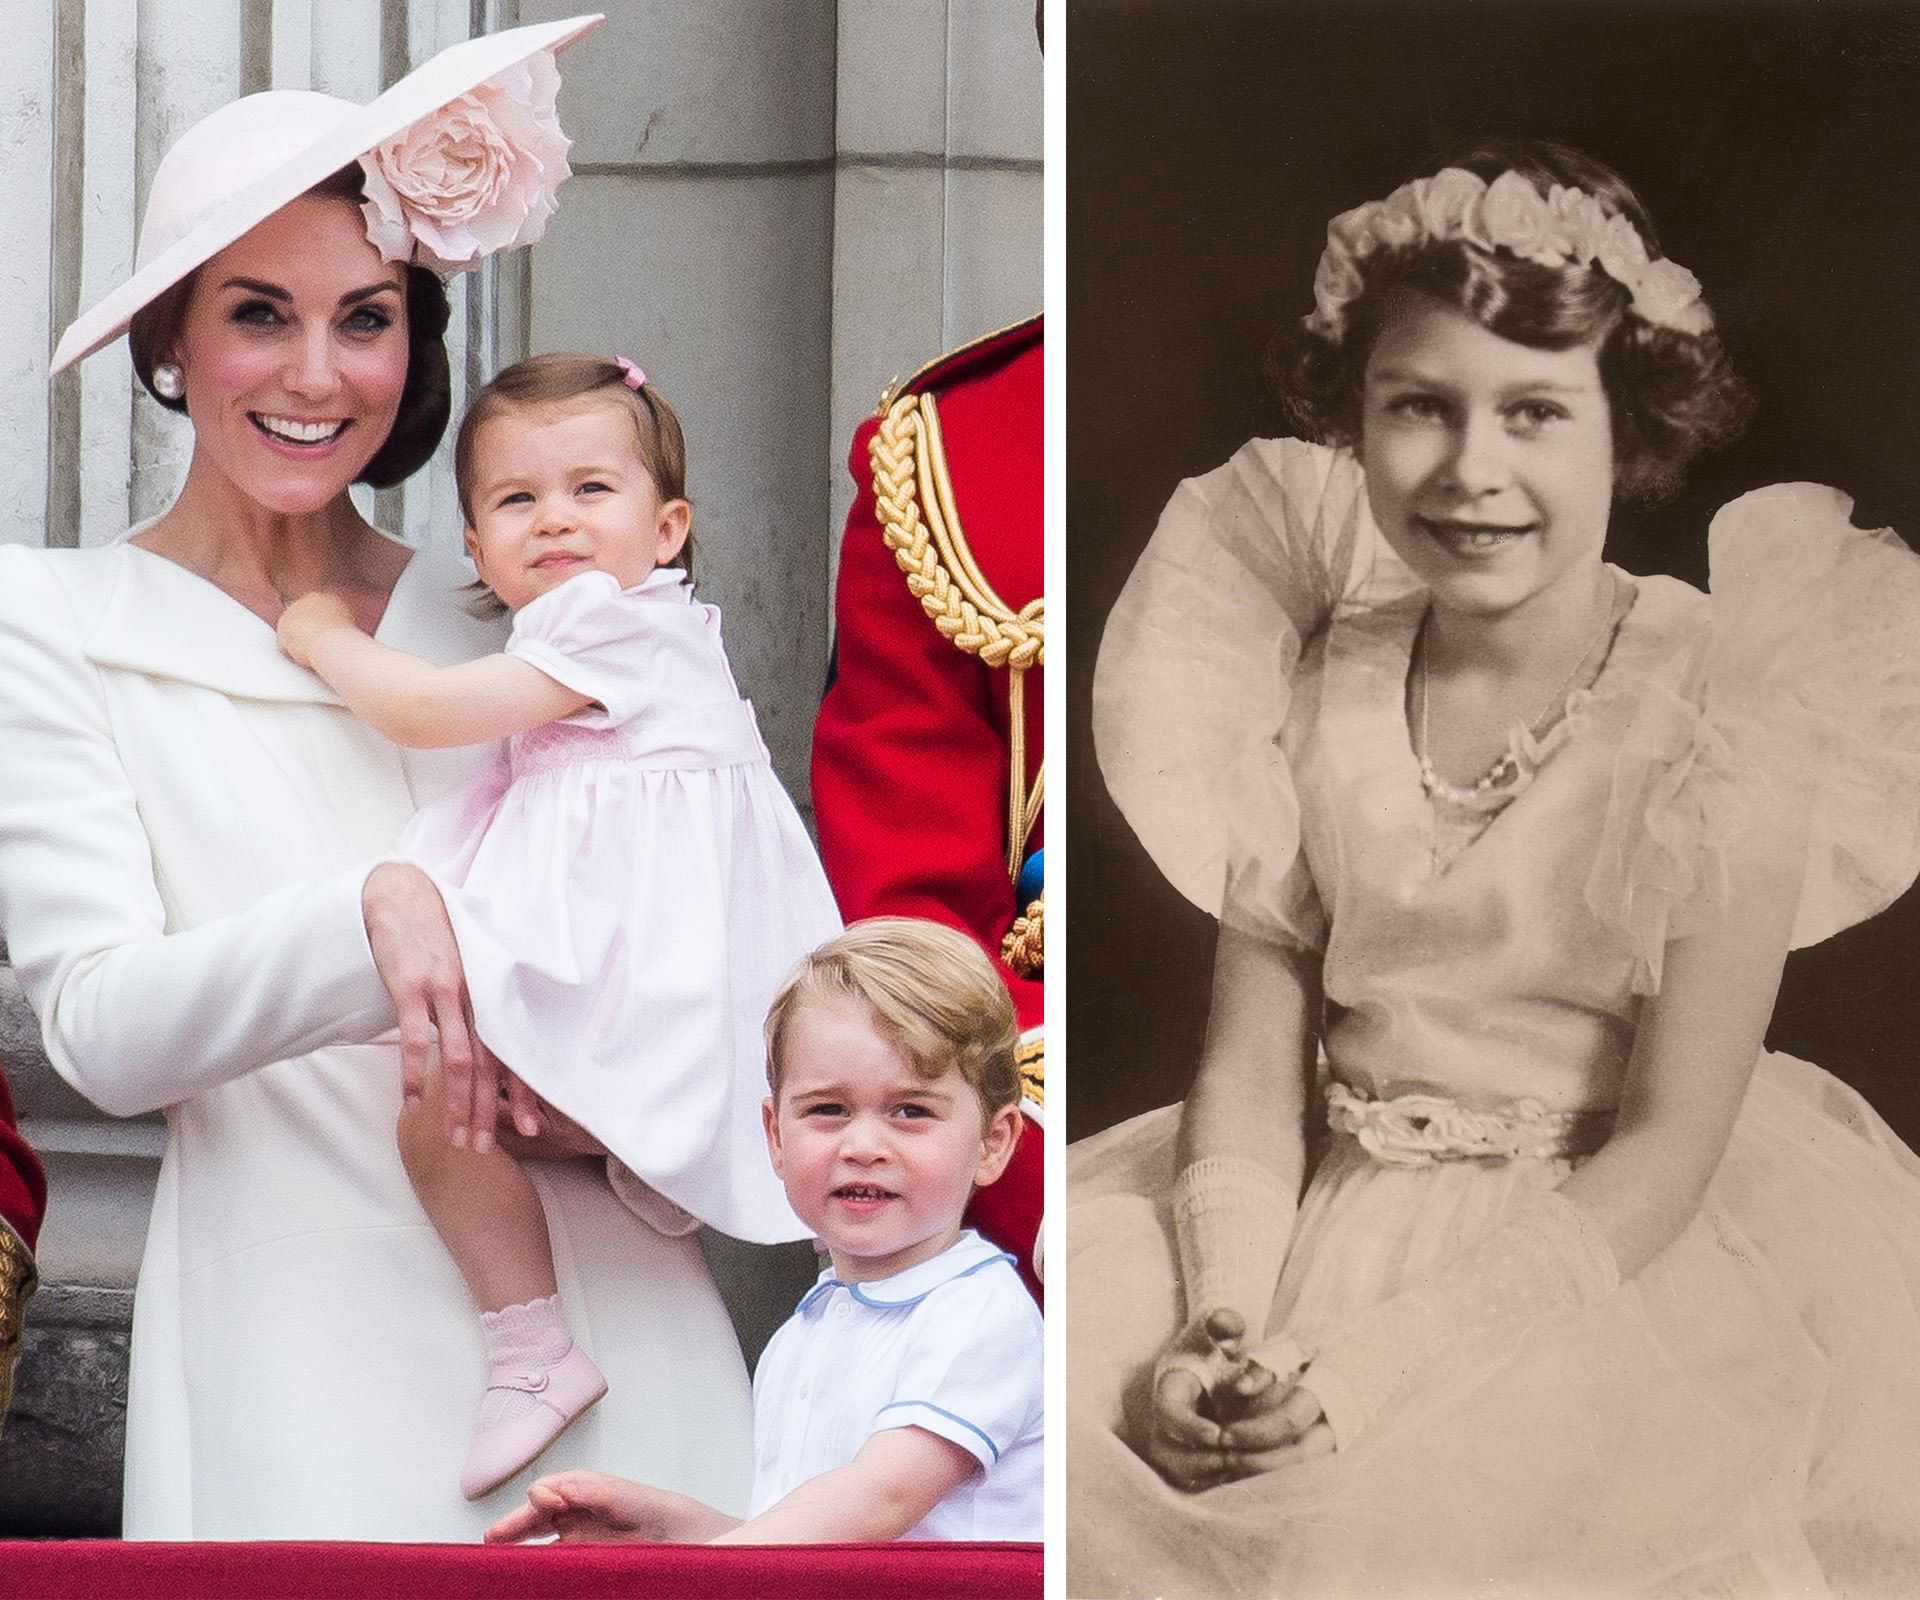 Who does Princess Charlotte look like most?